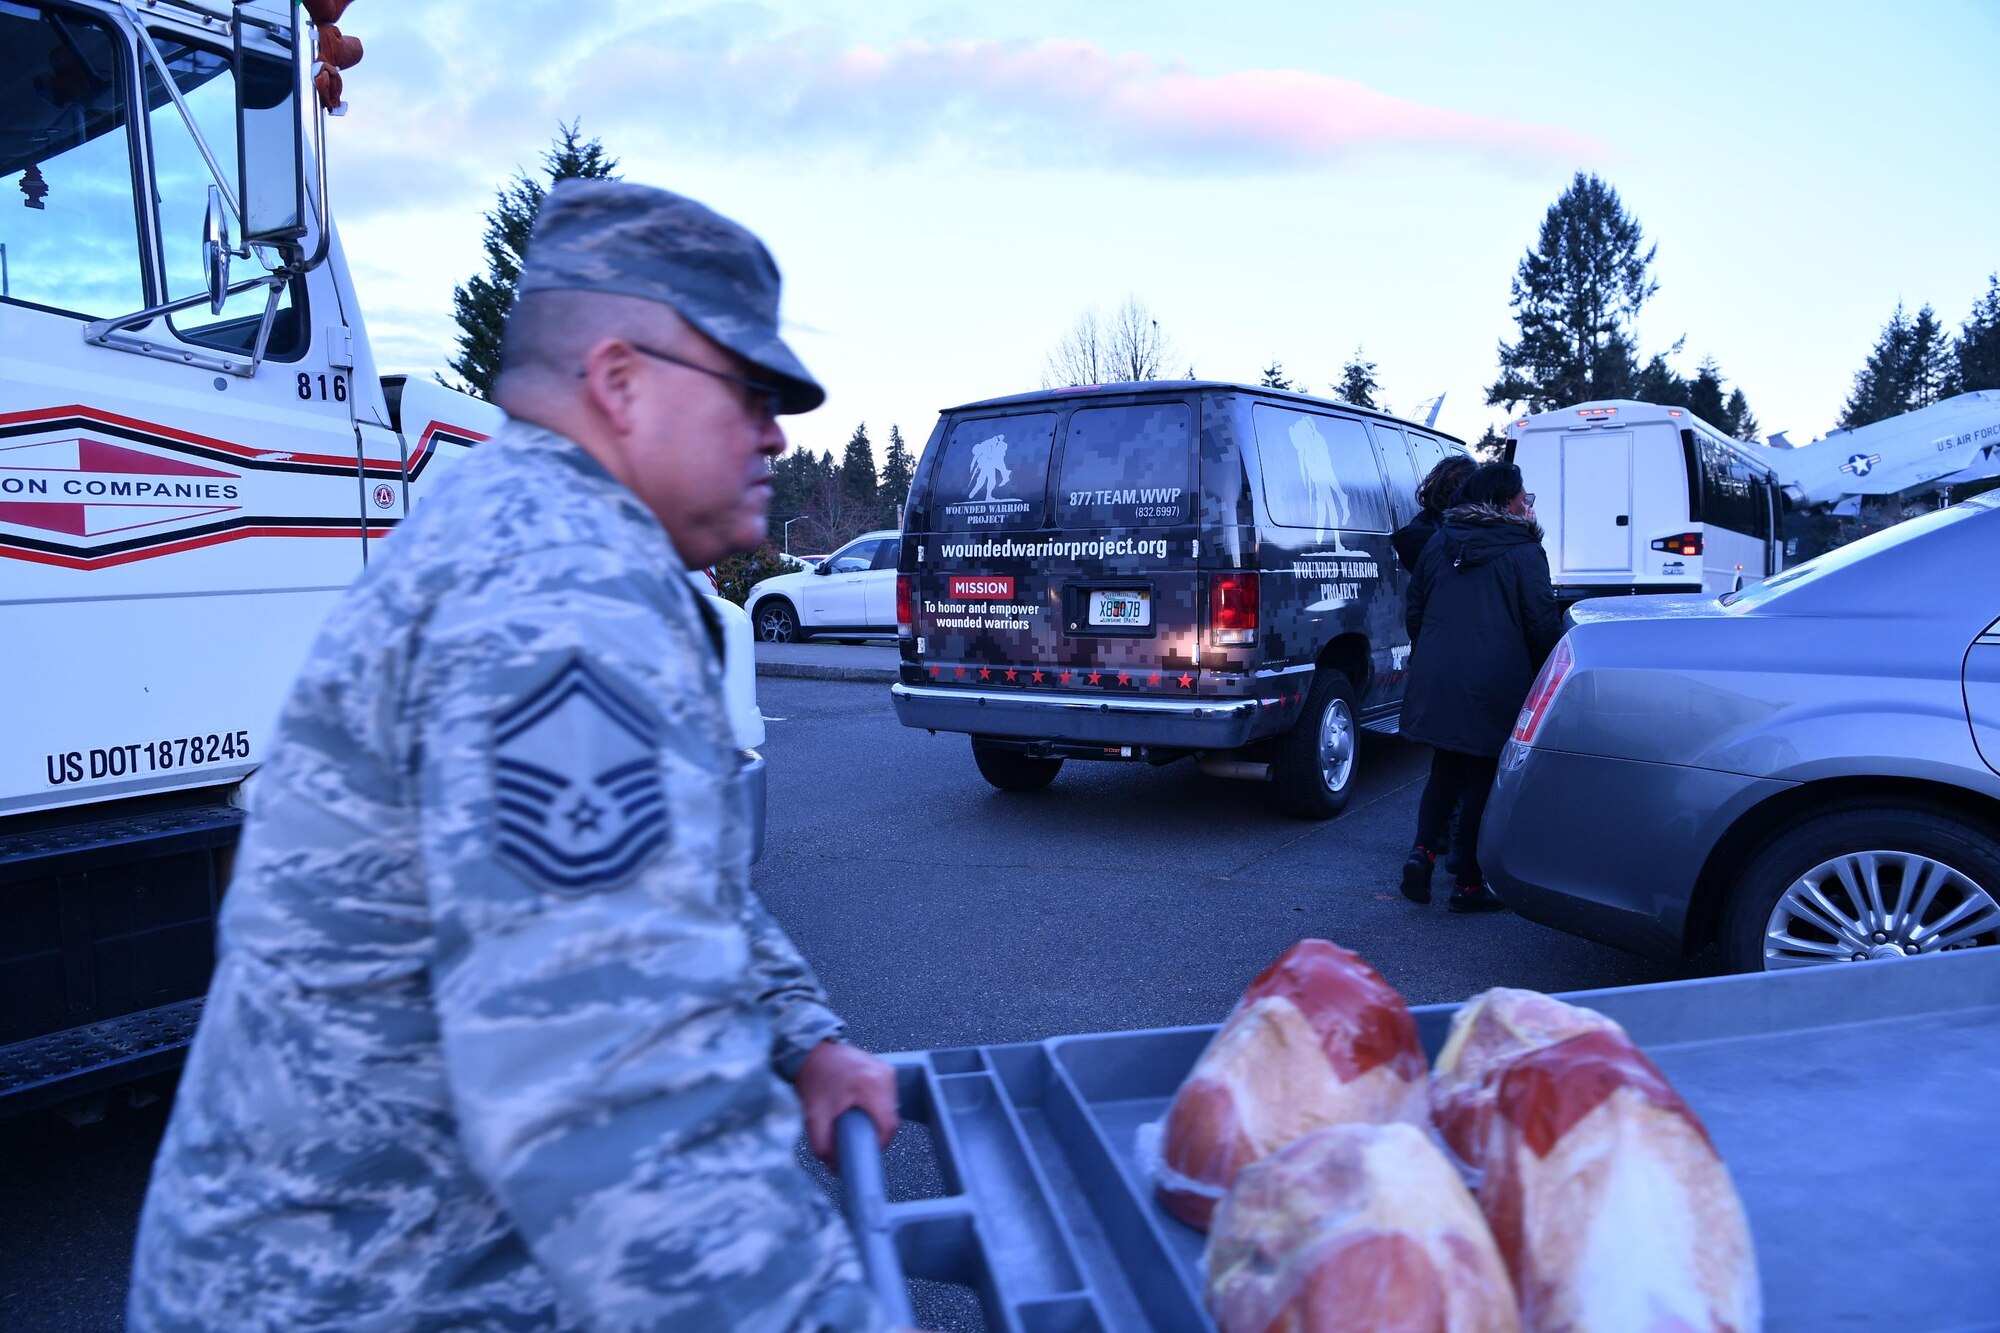 Senior Master Sgt. Carlos Gonzales, 225th Support Squadron, transports donated holiday hams during Operation Ham Grenade, sponsored by the Association of the United States Army, Air Force Association, and Pierce Military and Business Alliance, into the Western Air Defense Sector building Dec. 16.  (U.S. Air National Guard photo by Kimberly D. Burke)